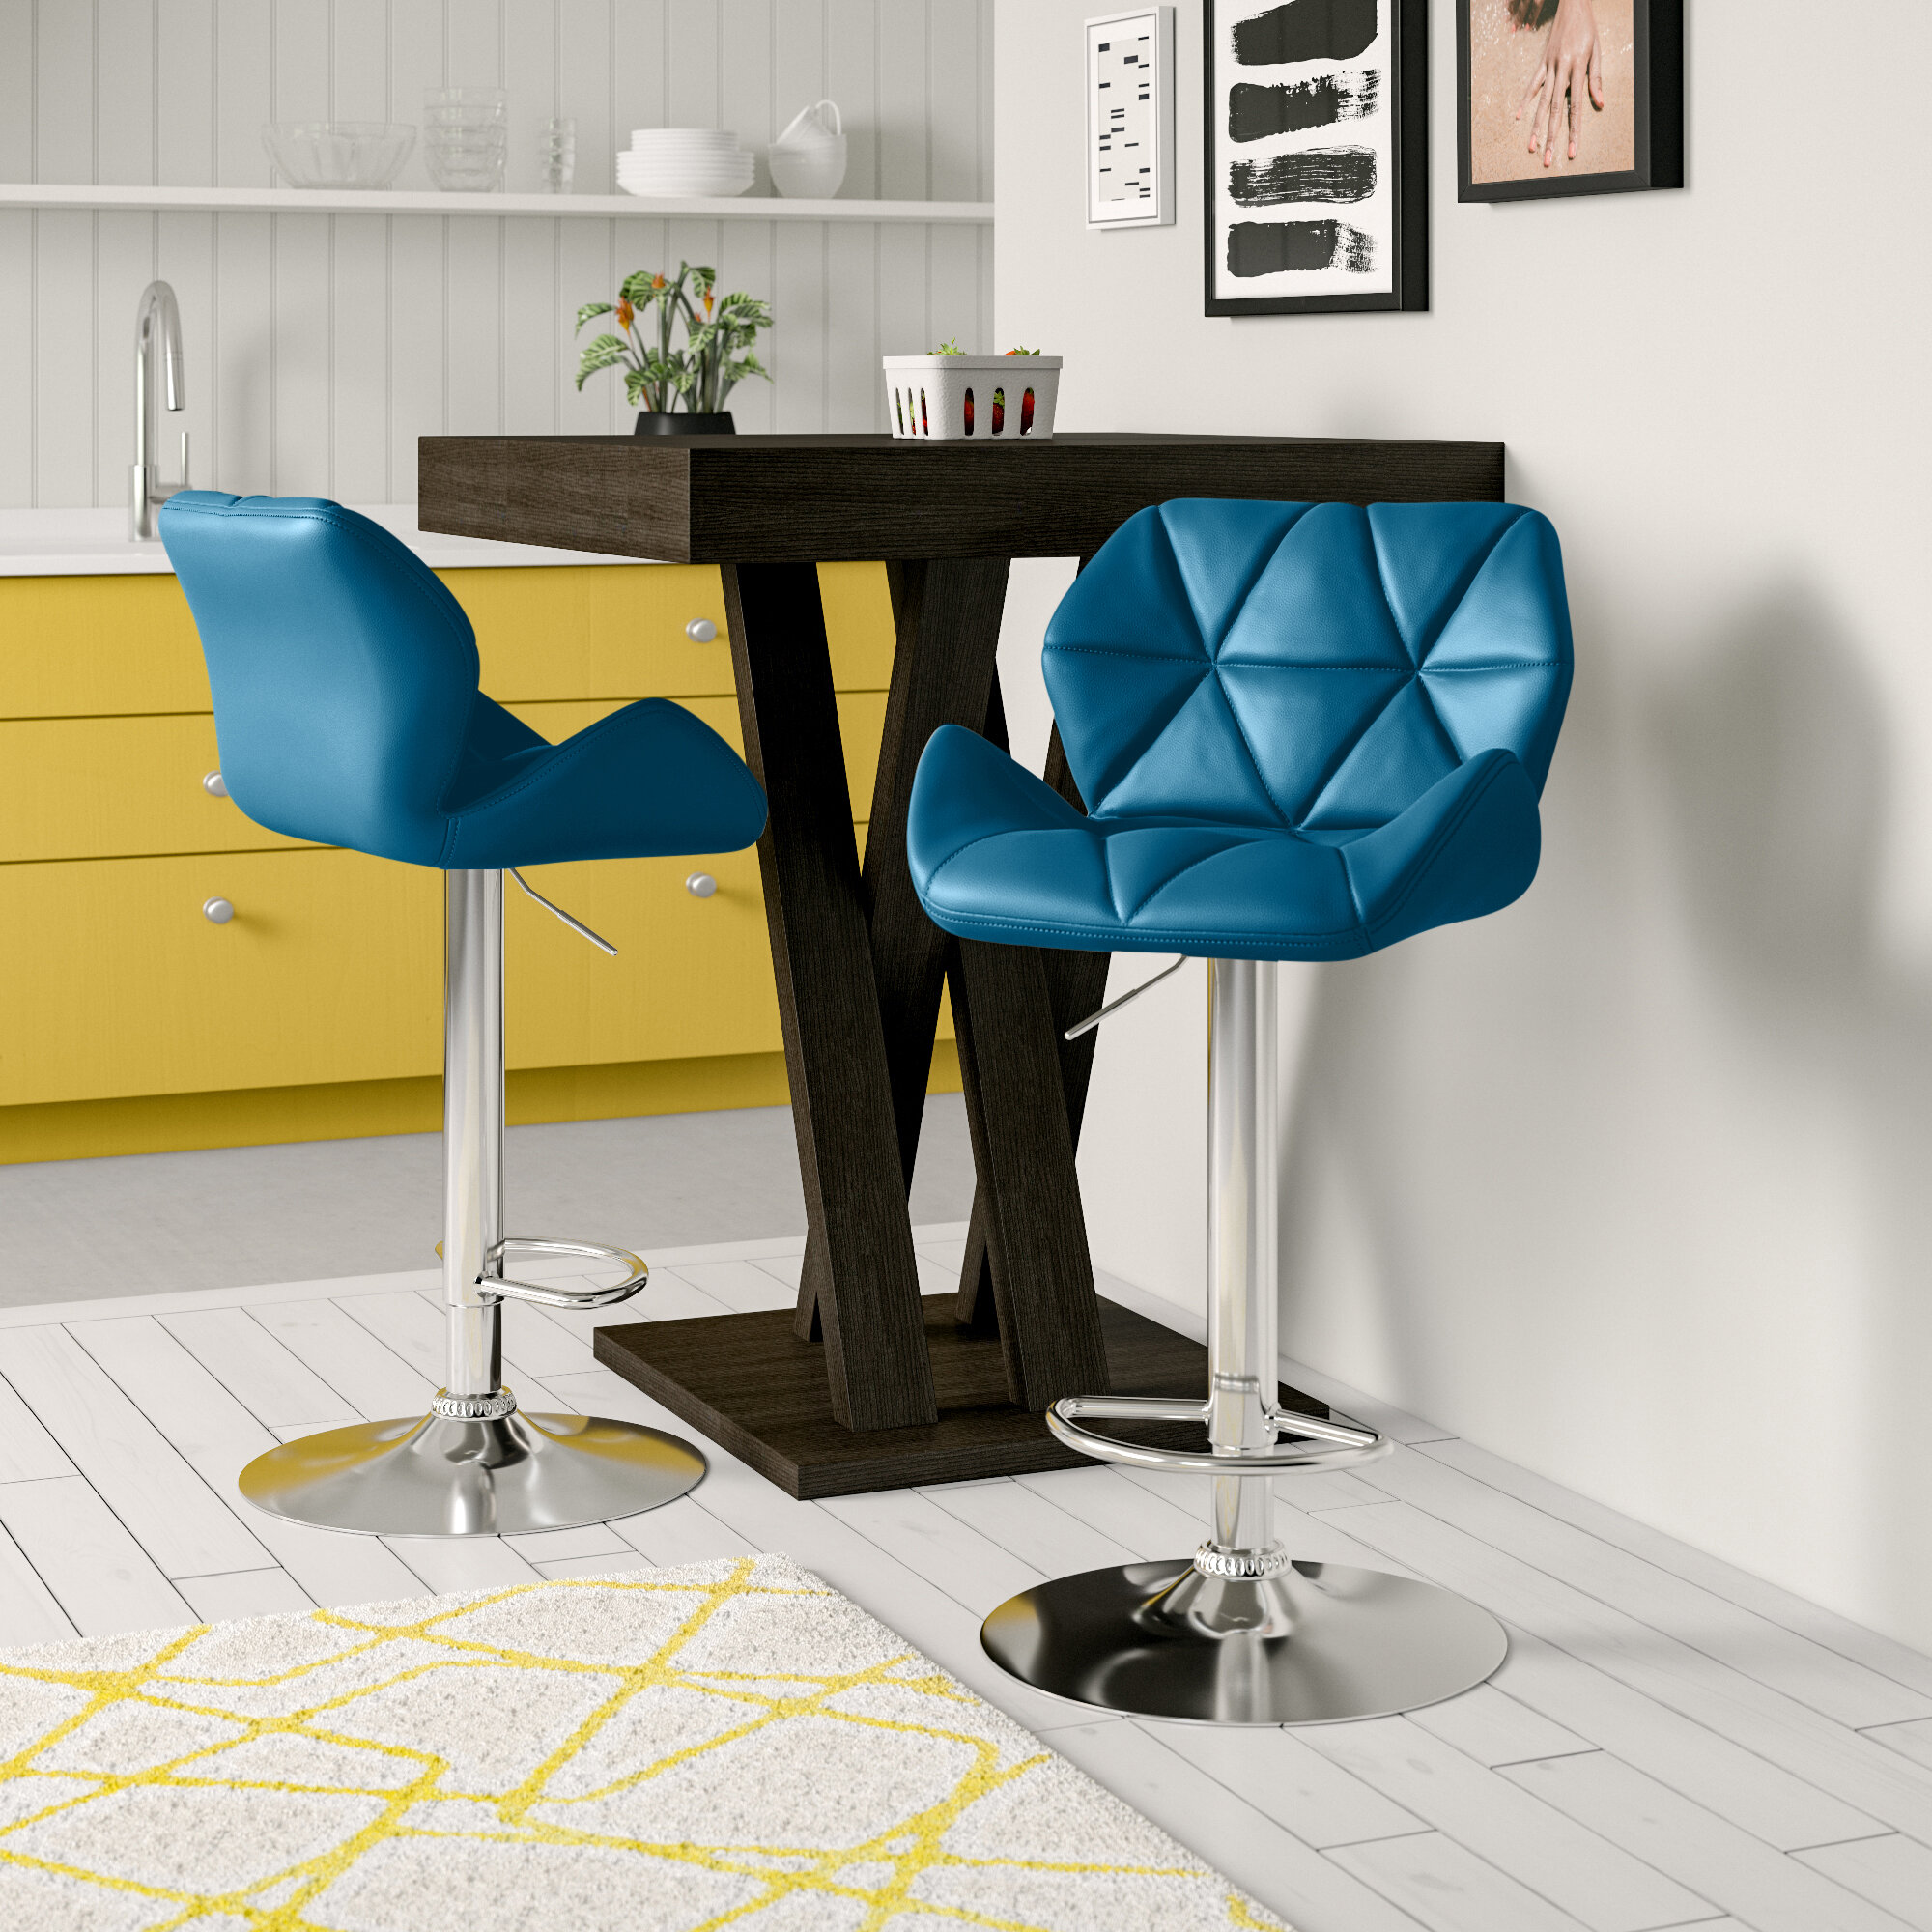 LOVEMYHOUSE Blue Bar Stool 1 SET Kitchen Stool Height and 360 ° Swivel Backless Metal Stool with Plastic Seat 